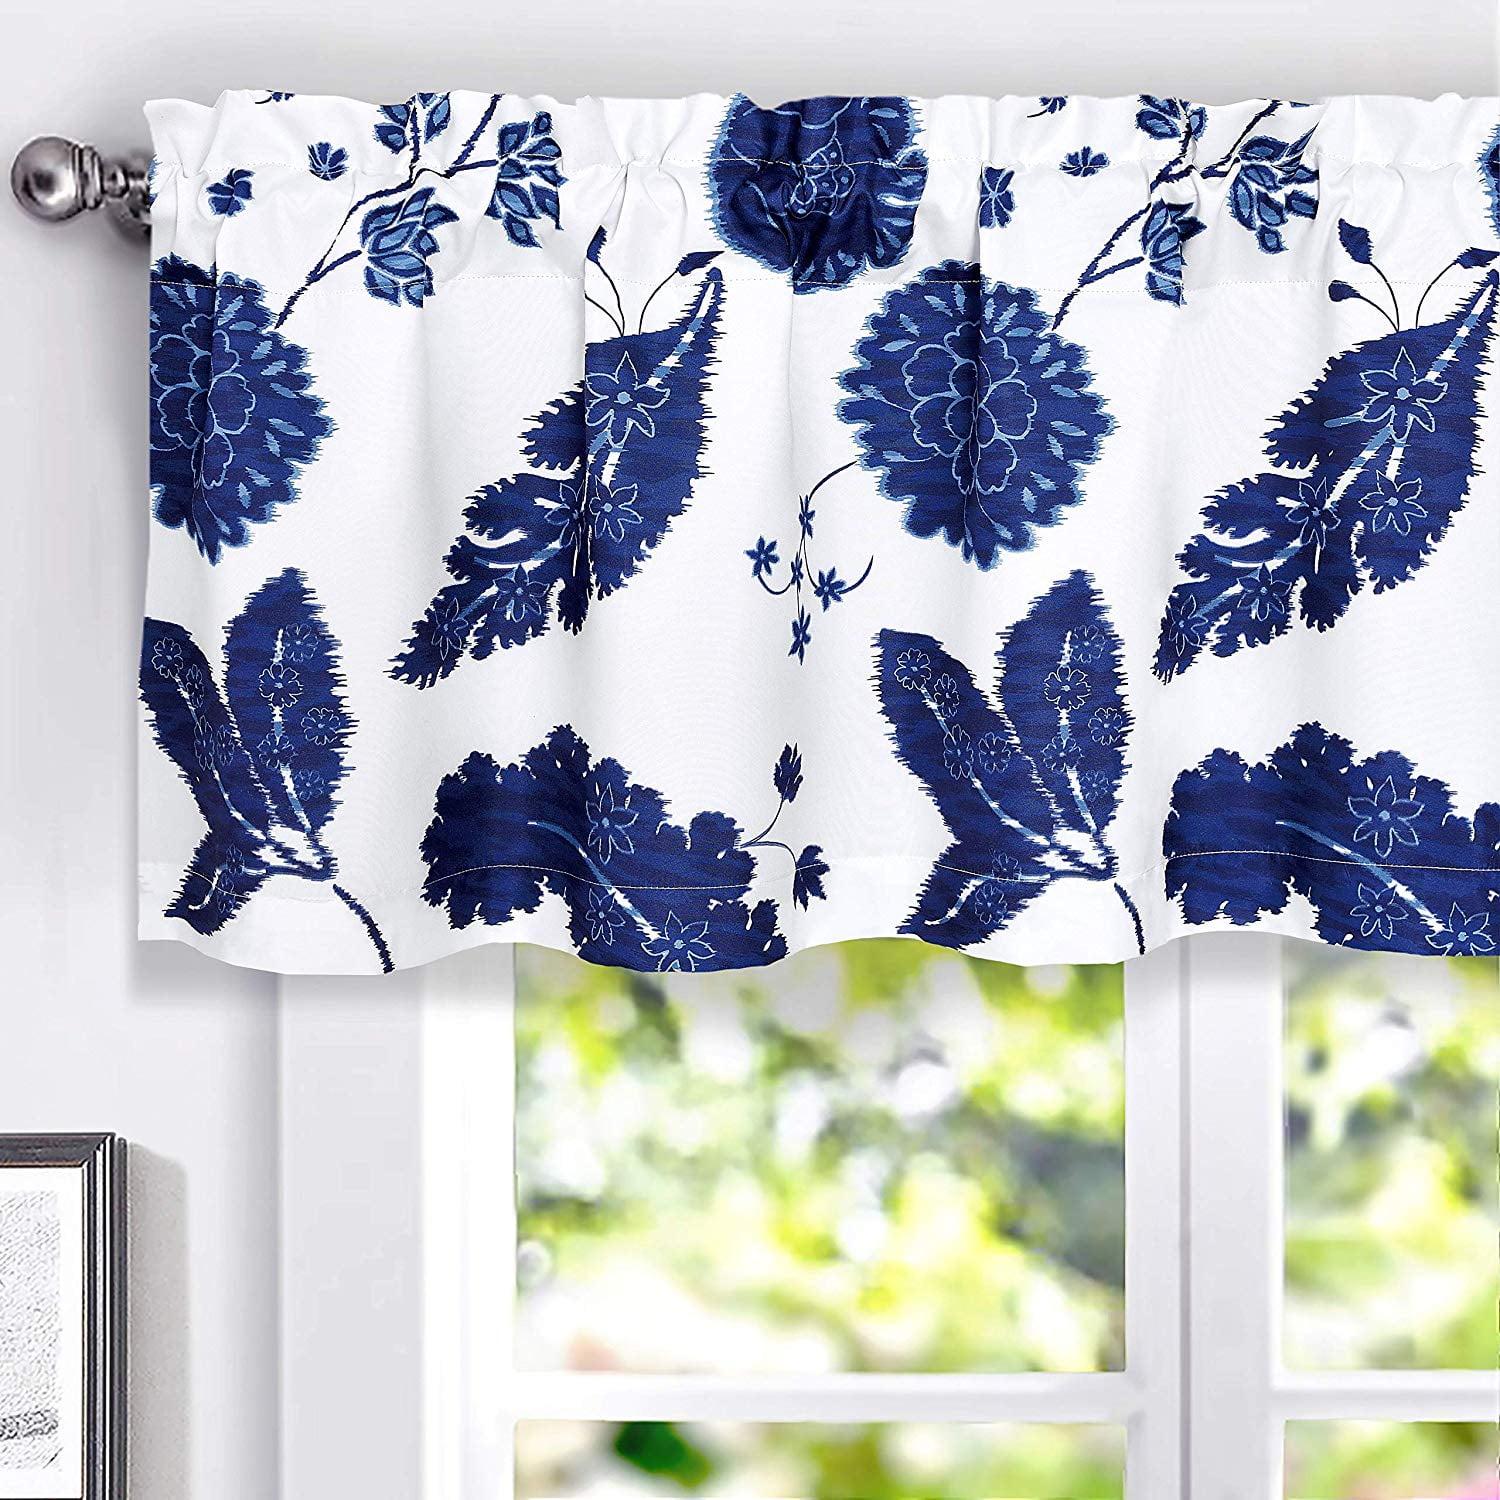 DriftAway Gianna Floral Leaf Botanical Lined Thermal Insulated Energy Saving Window Curtain Valance for Living Room Bedroom Kitchen Rod Pocket 2 Pack 52 Inch by 18 Inch Plus 2 Inch Header Navy 